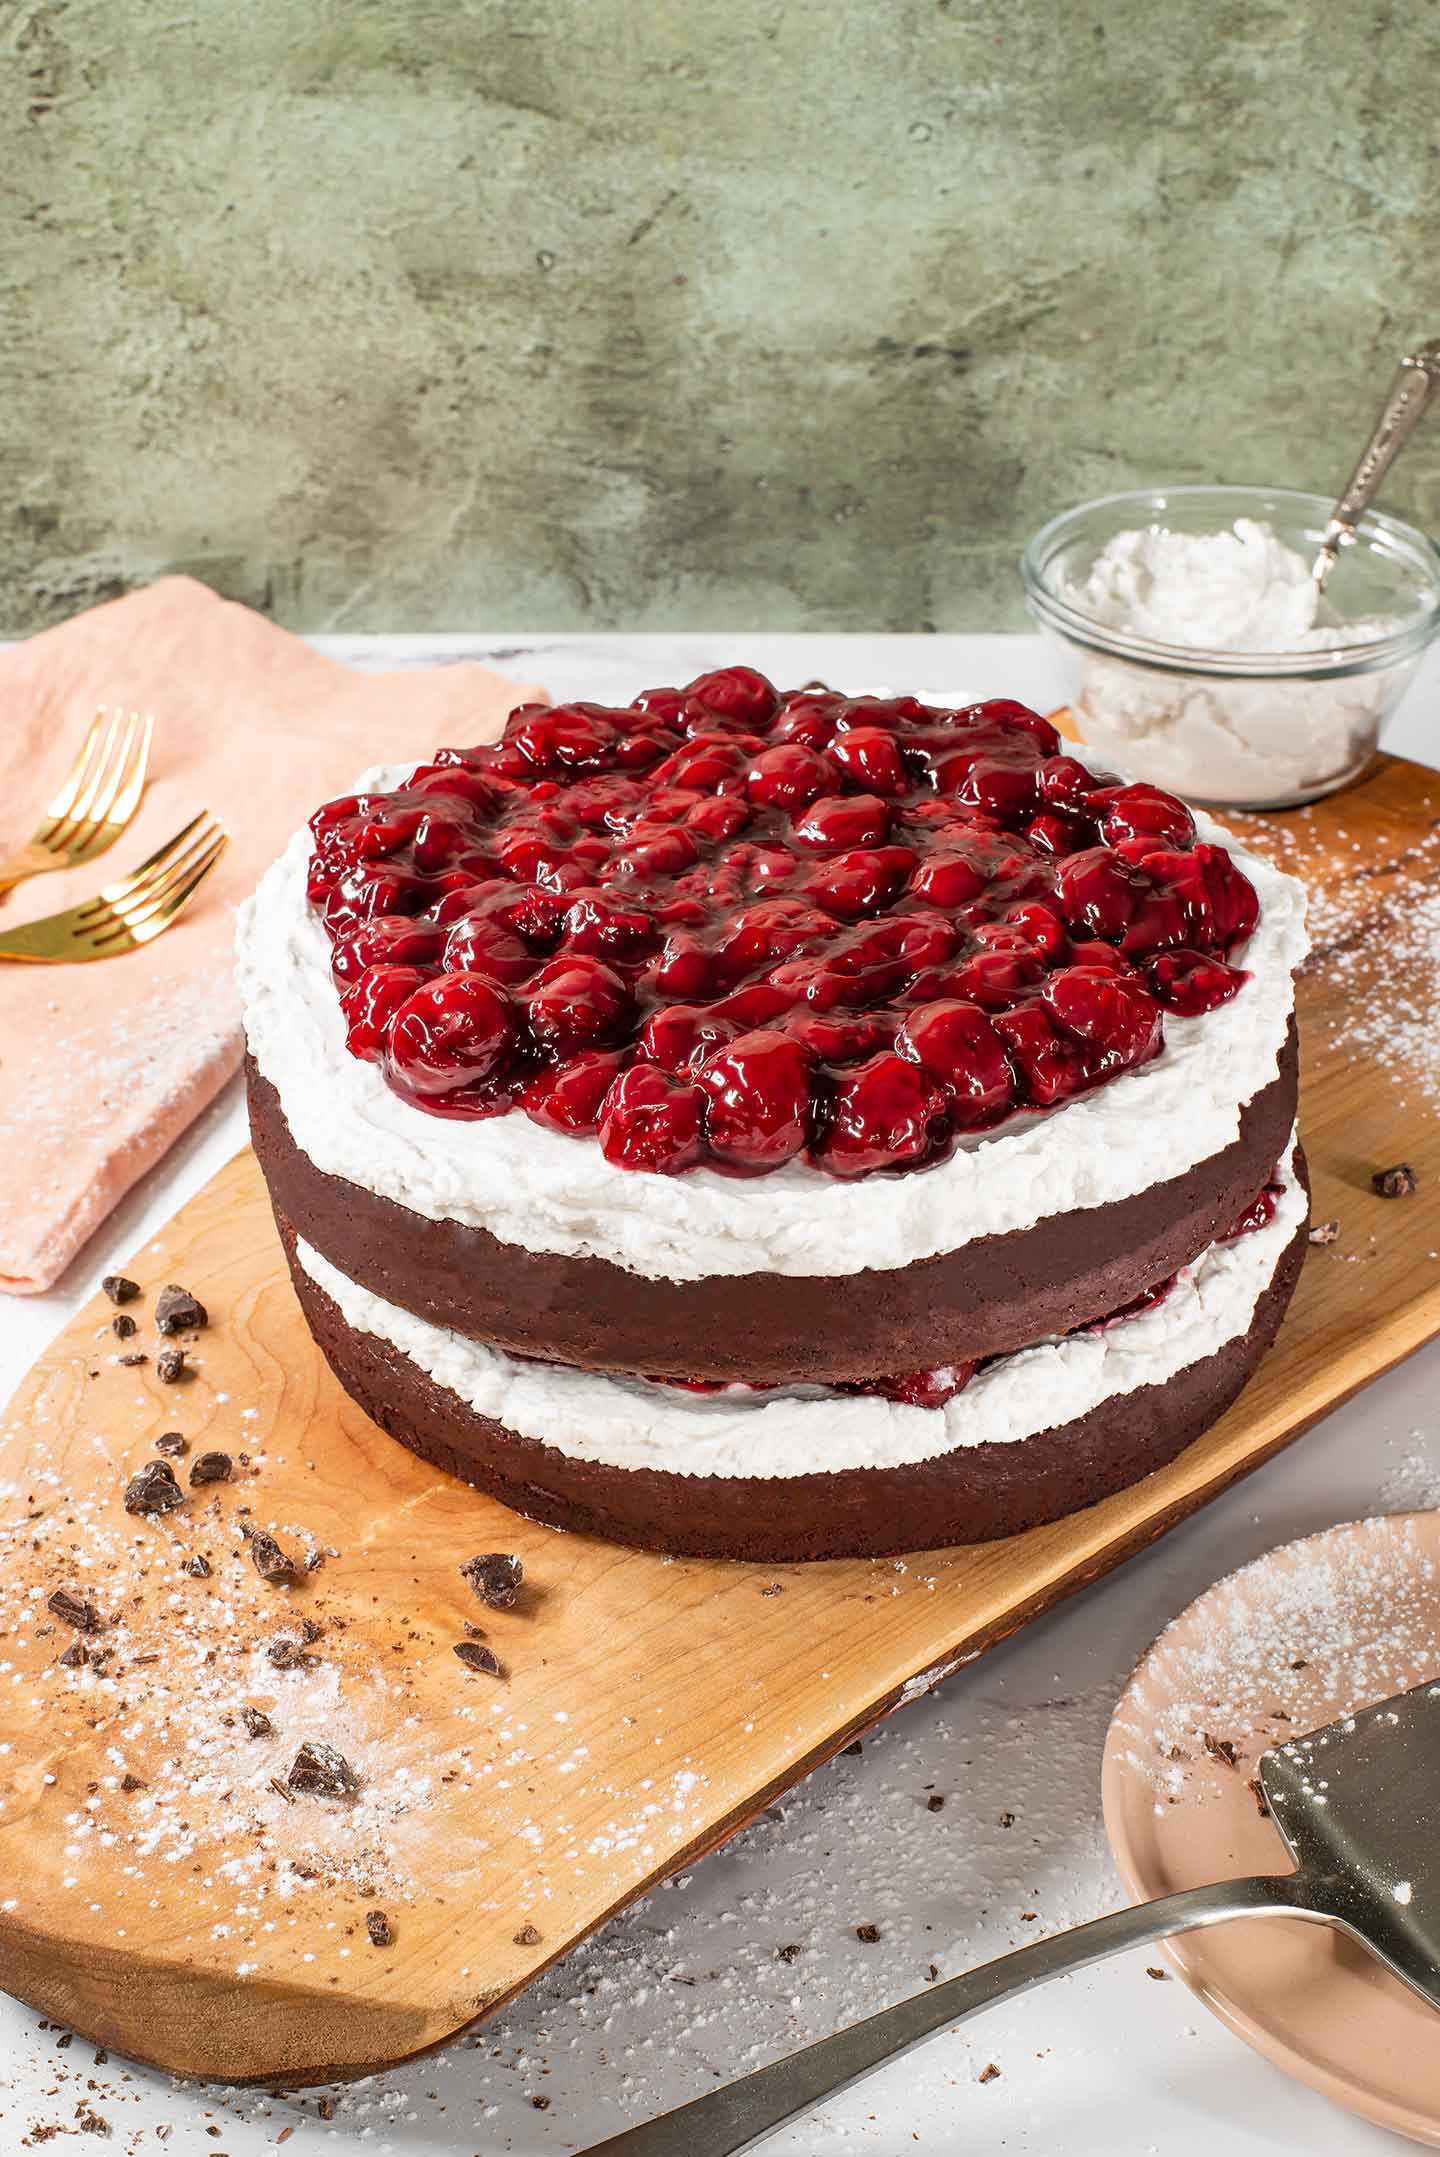 Side view of a vegan black forest cake topped with coconut whipped cream and a thick cherry sauce. The sides of the cake are bare, showing off the two layers of chocolate cake with more whip and cherries in the centre.